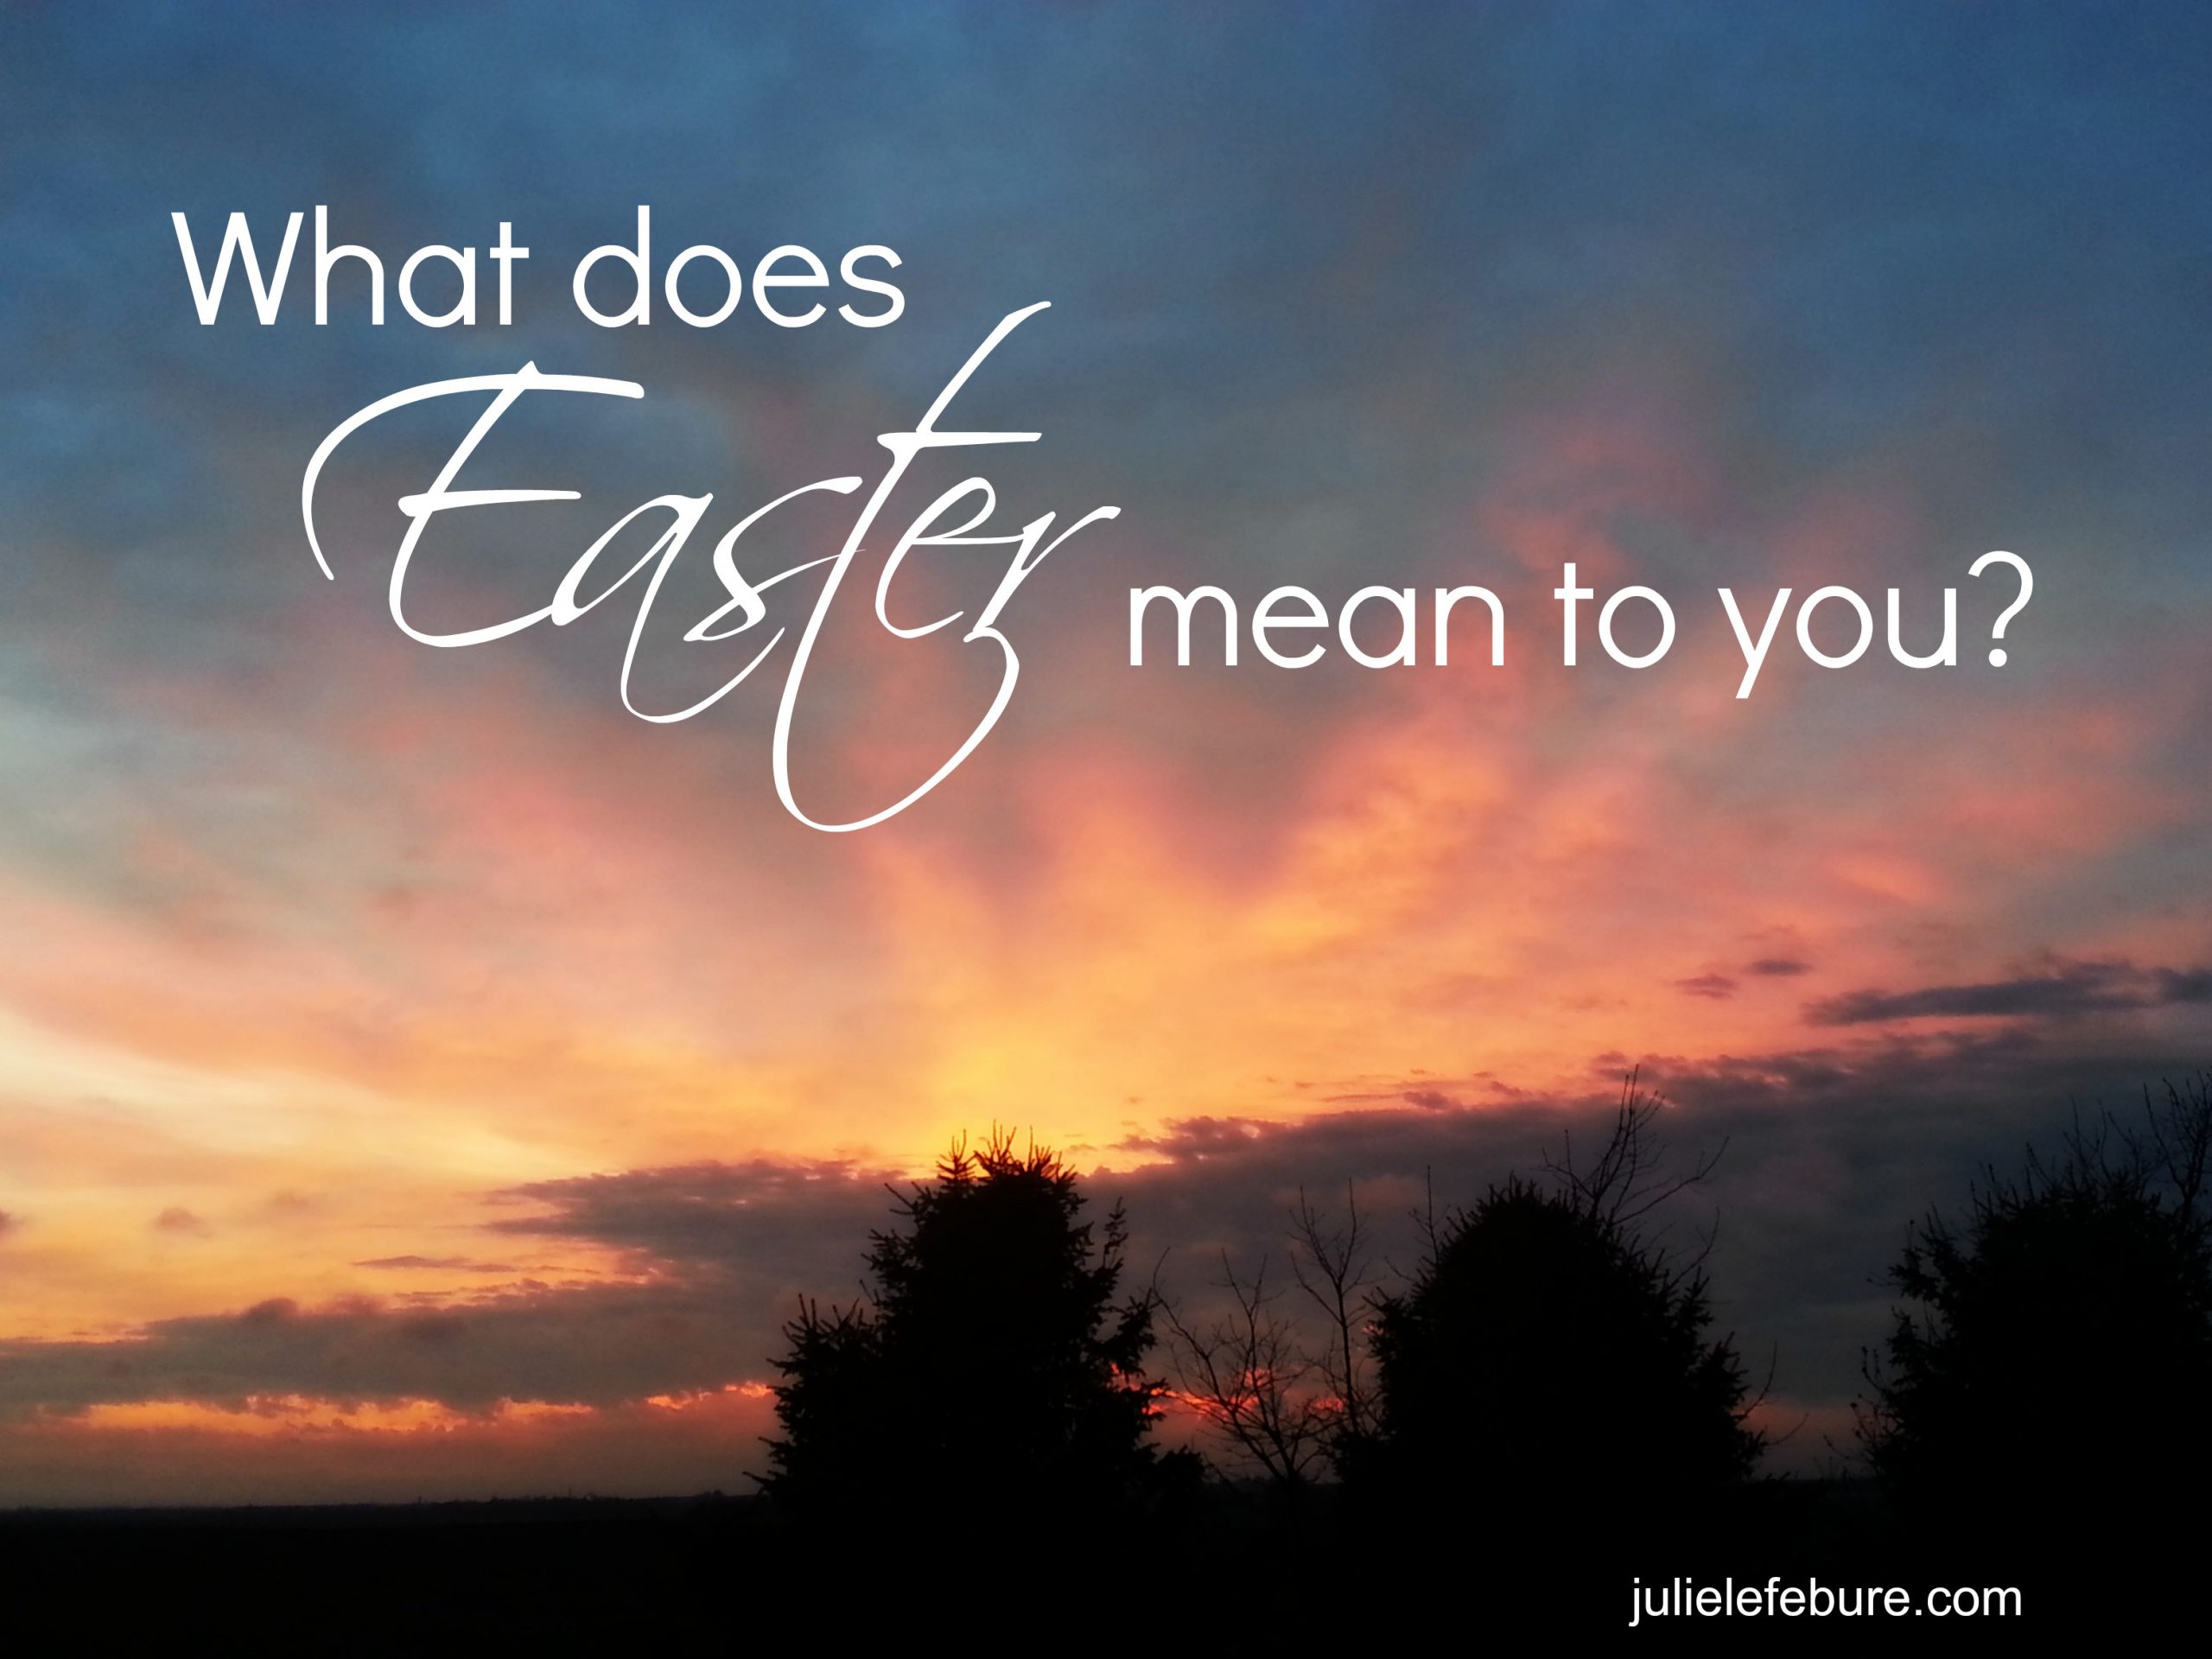 What Does Easter Mean To You?